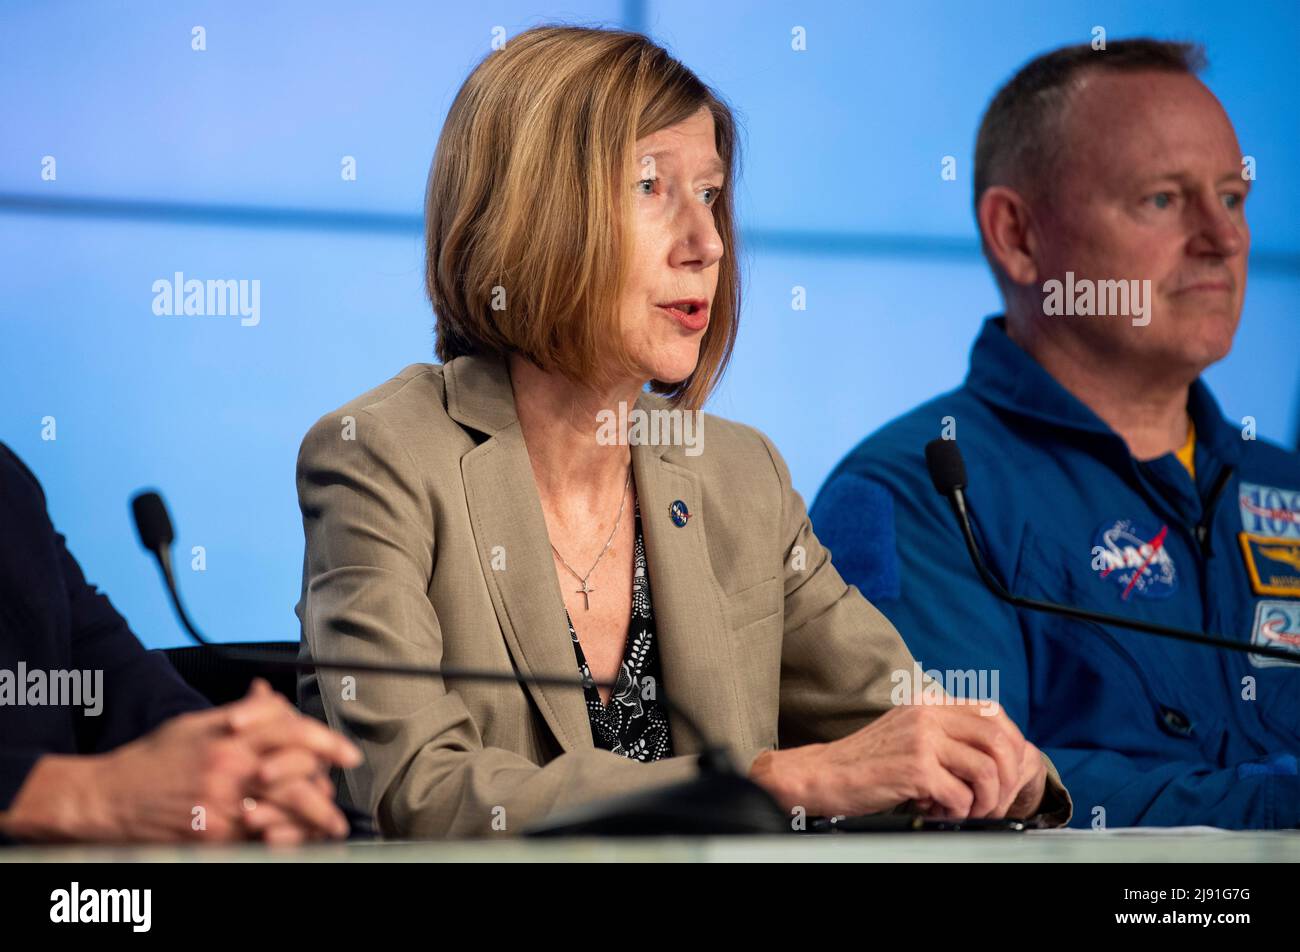 Cape Canaveral, United States of America. 18 May, 2022. NASA Kathy Lueders, associate administrator for Space Operations Mission Directorate, responds to a question during a press conference ahead of the launch of the United Launch Alliance Atlas V rocket carrying the Boeing CST-100 Starliner spacecraft aboard at the Kennedy Space Center, May 18, 2022 in Cape Canaveral, Florida. The Orbital Flight Test-2 will be second un-crewed flight test and will dock to the International Space Station and is expected to lift off May 19th. Credit: Joel Kowsky/NASA/Alamy Live News Stock Photo